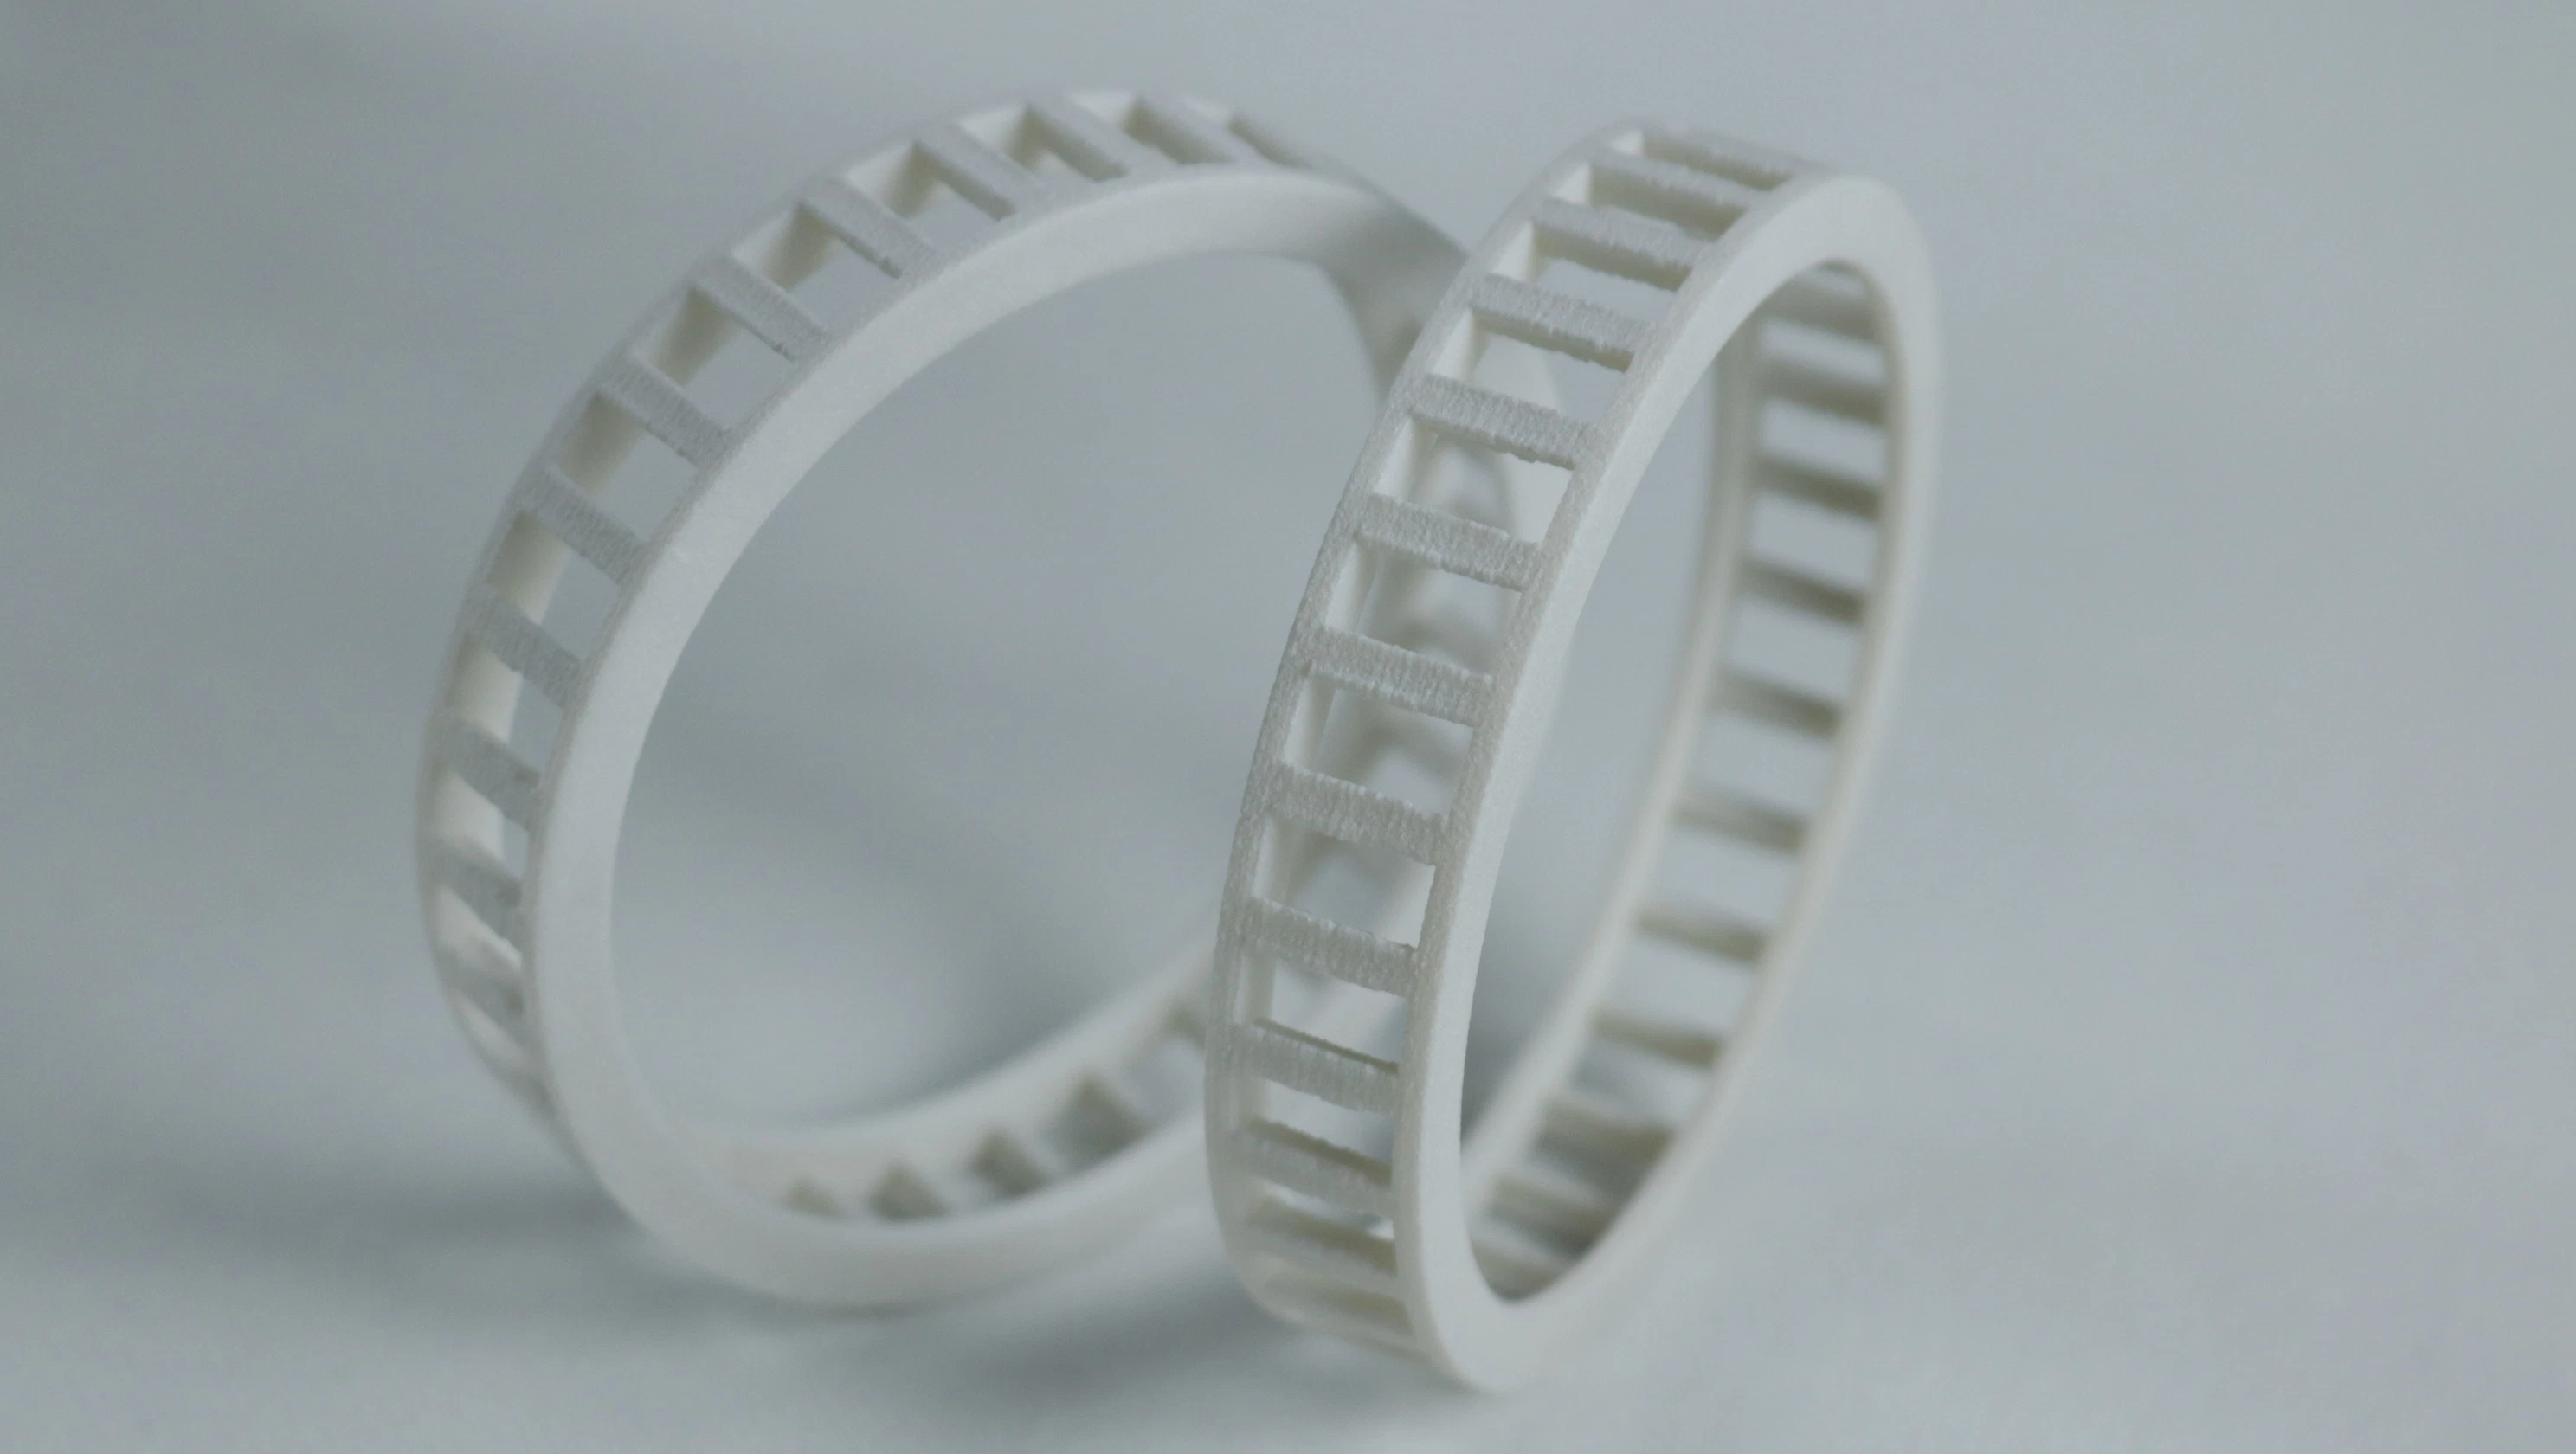 Industrial Part Manufacturers Customized OEM and ODM SLS 3D Printing White Nylon Glass Fibre Plastic Parts 3D Printing Service